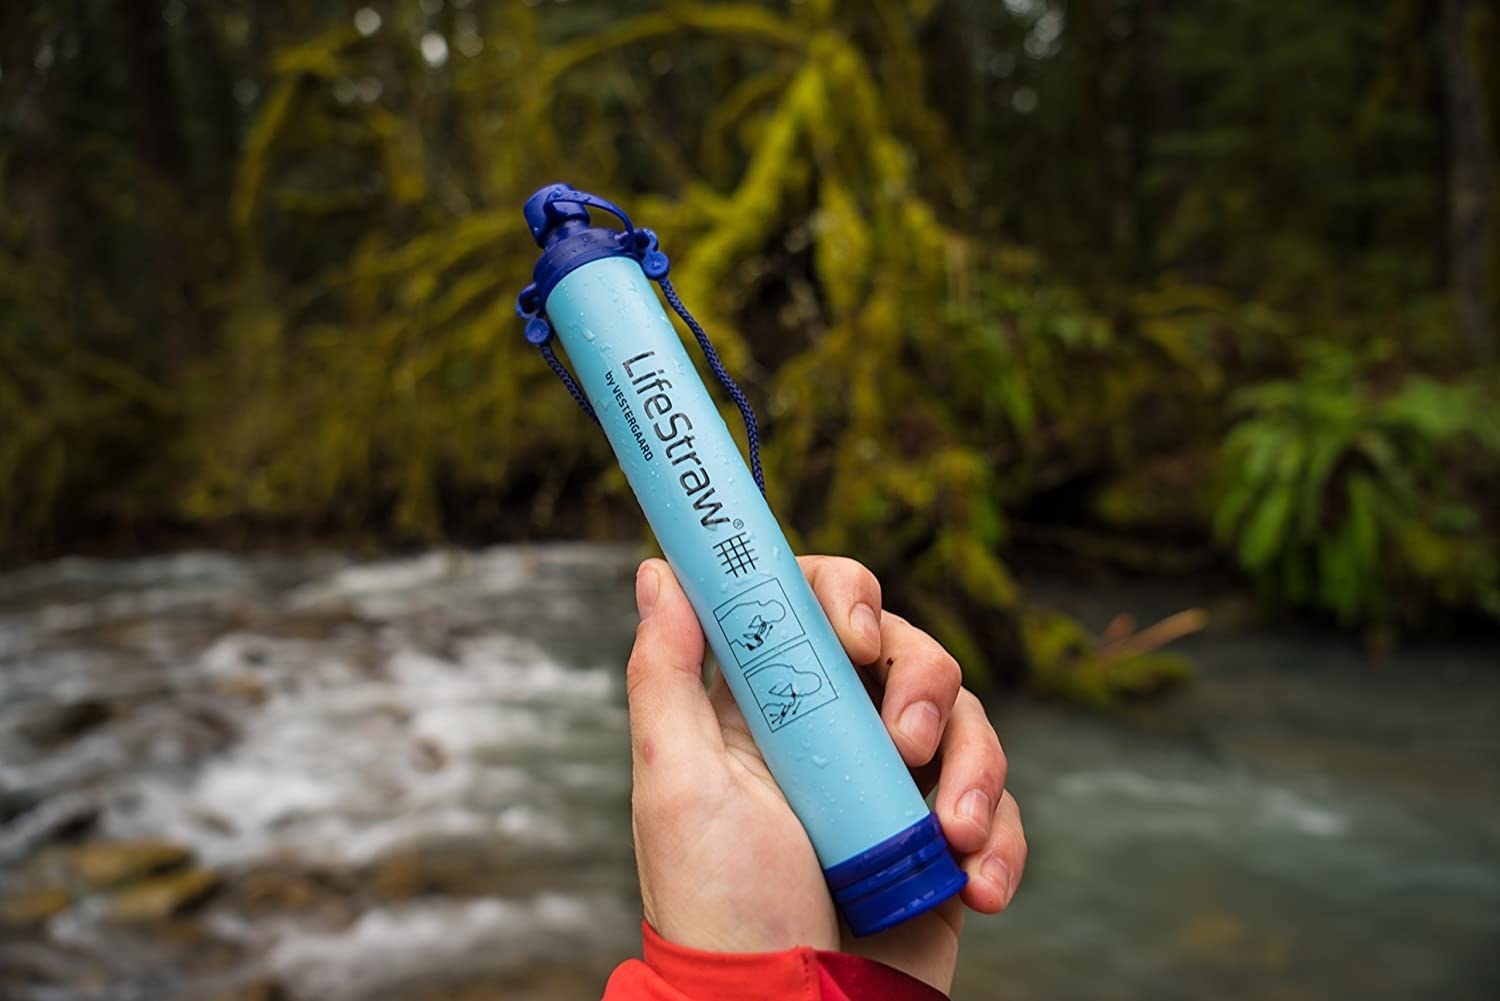 A person holds a life straw in front of an outdoor water setting